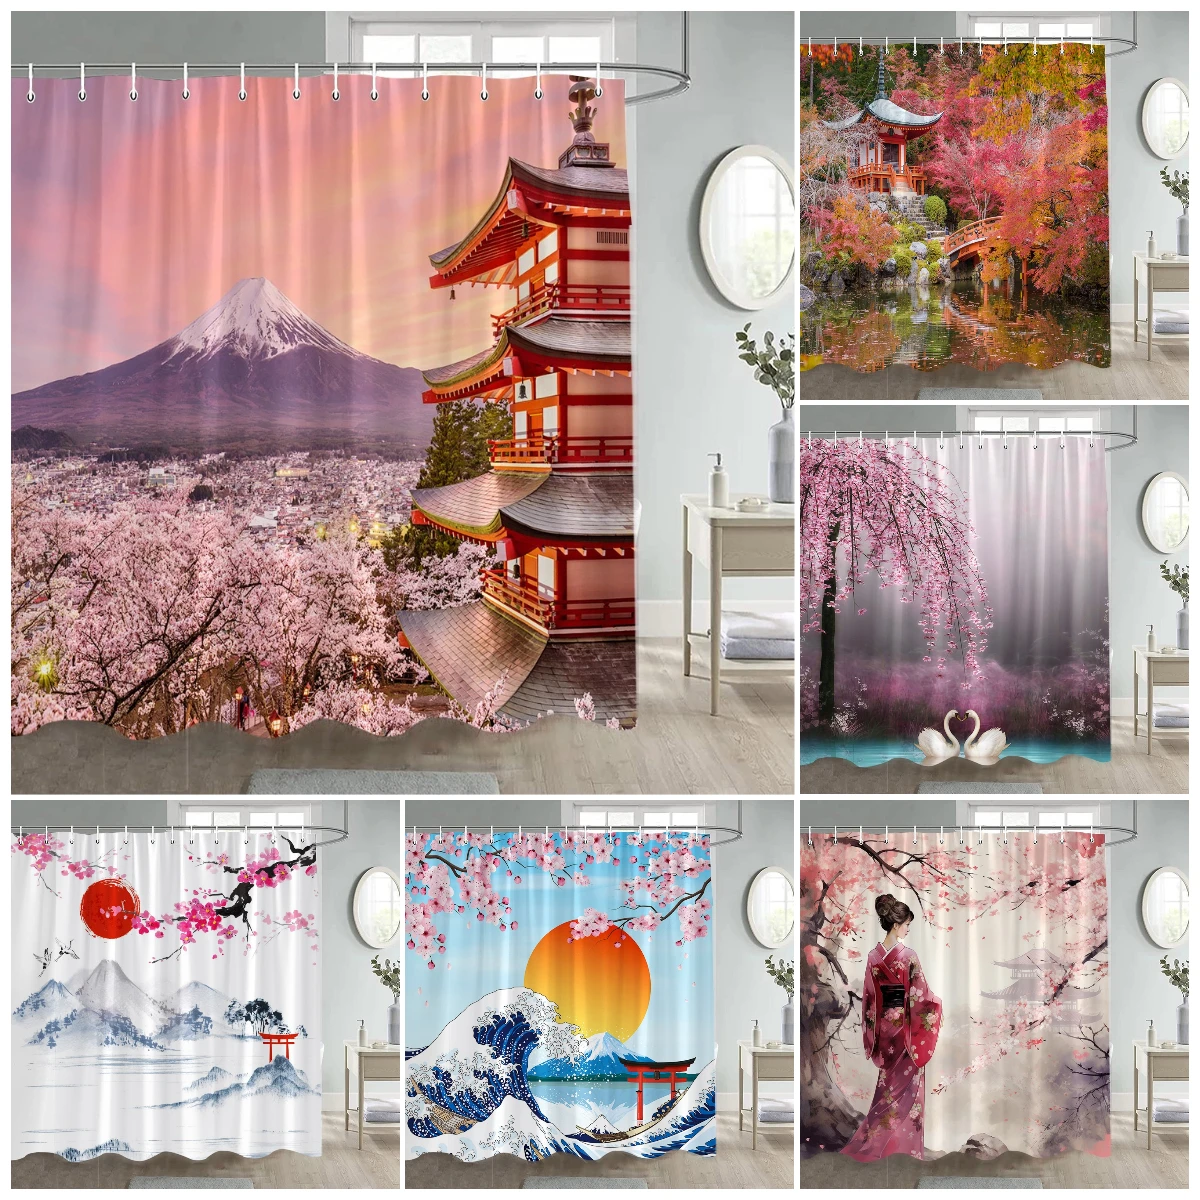 

Japan Mount Fuji Scenery Shower Curtain Pink Cherry Blossom Flower Natural Landscape Bathroom Decor Waterproof Screen With Hook